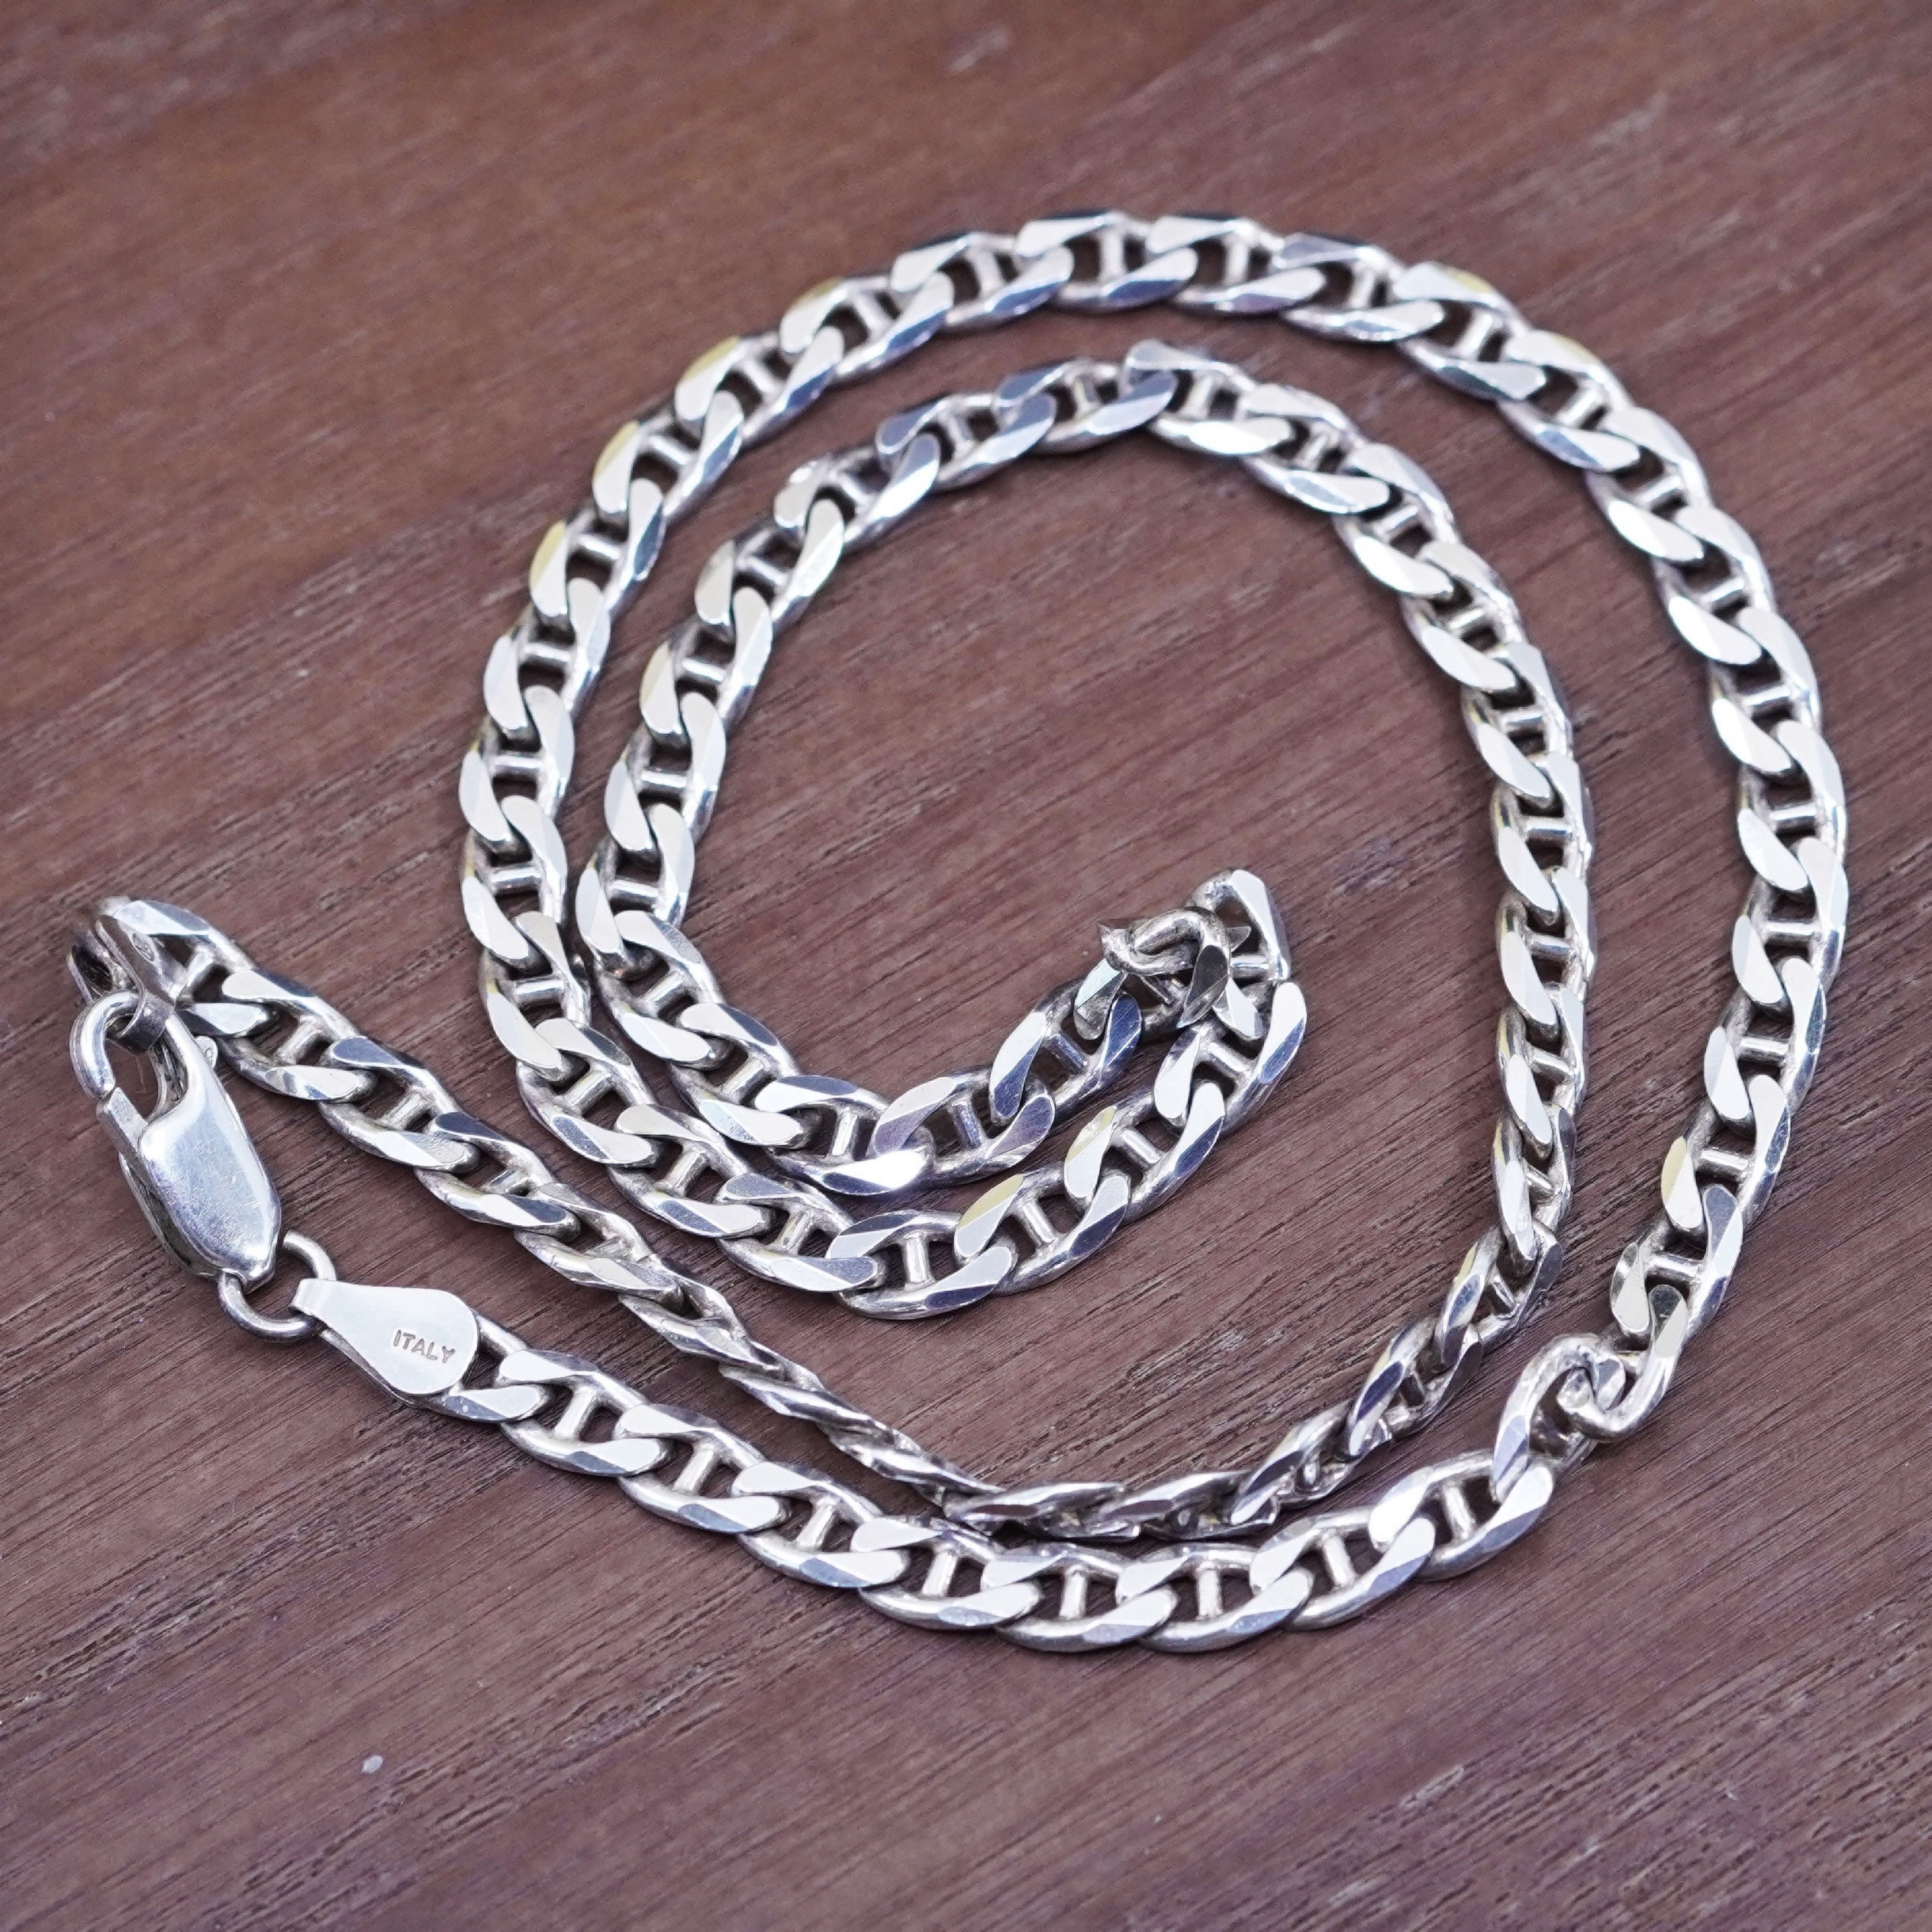 18 5mm Sterling Silver Anchor Chain Italy 925 Necklace - Etsy